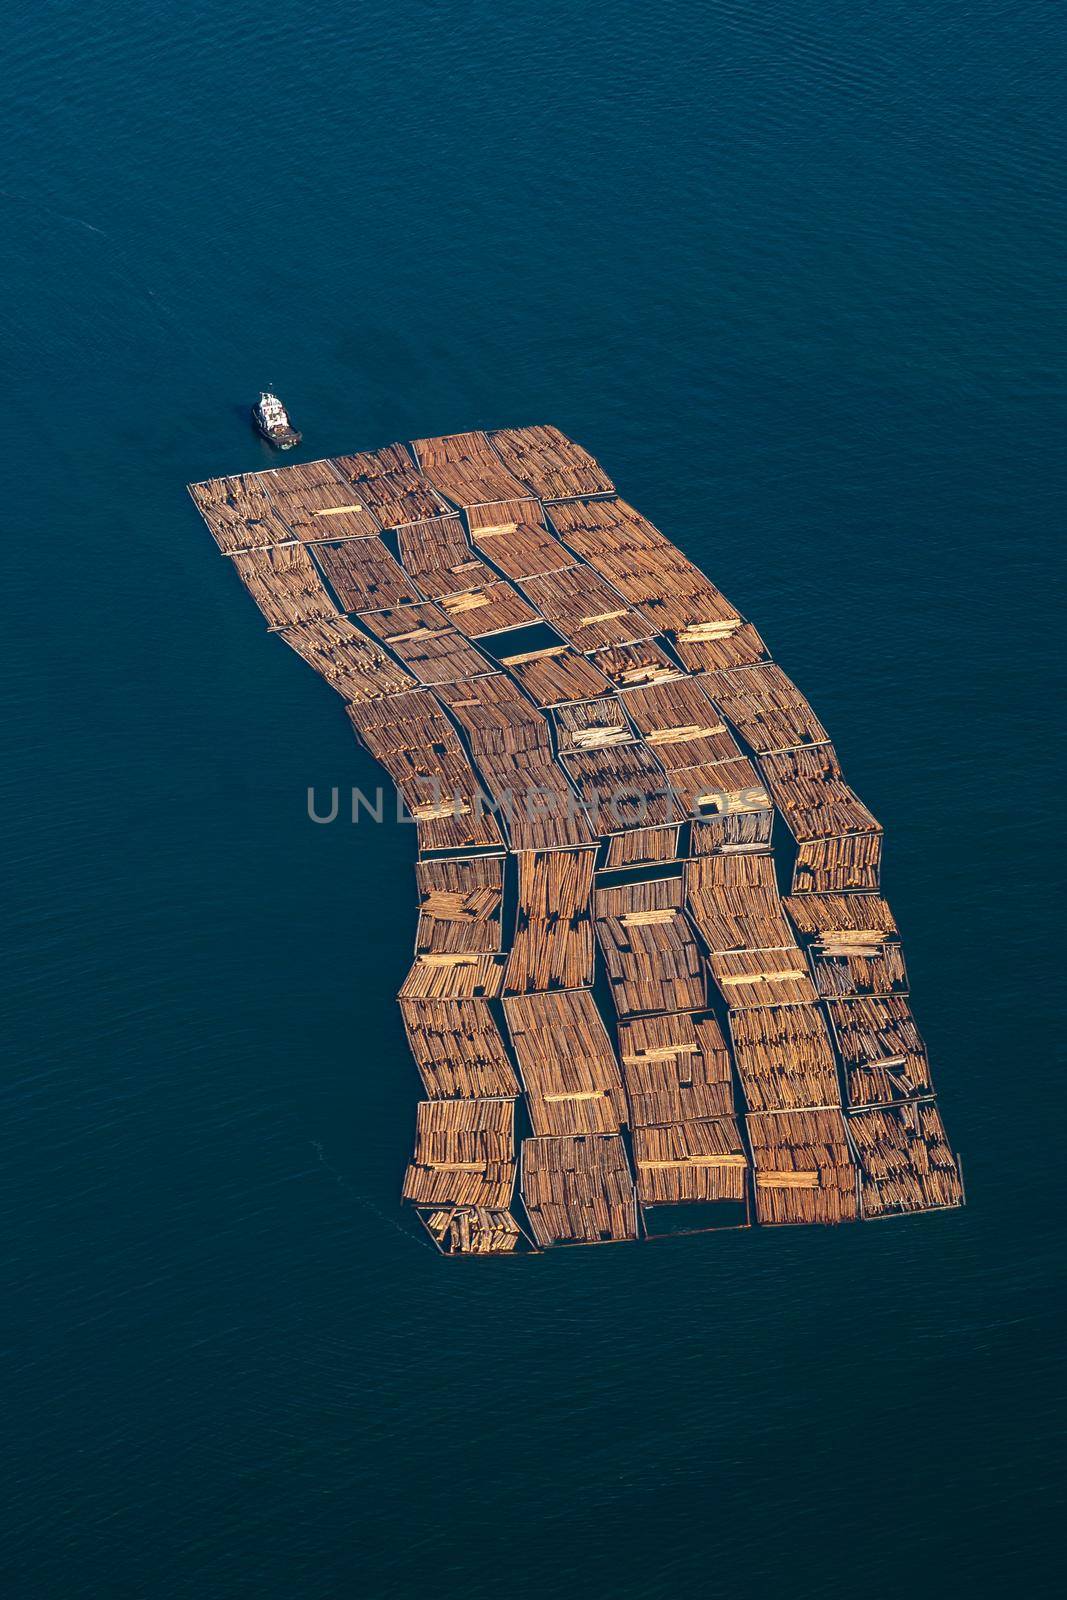 Tug boat pulling lumber wood in the ocean. Taken from aerial perspective near Sunshine Coast, British Columbia, Canada.